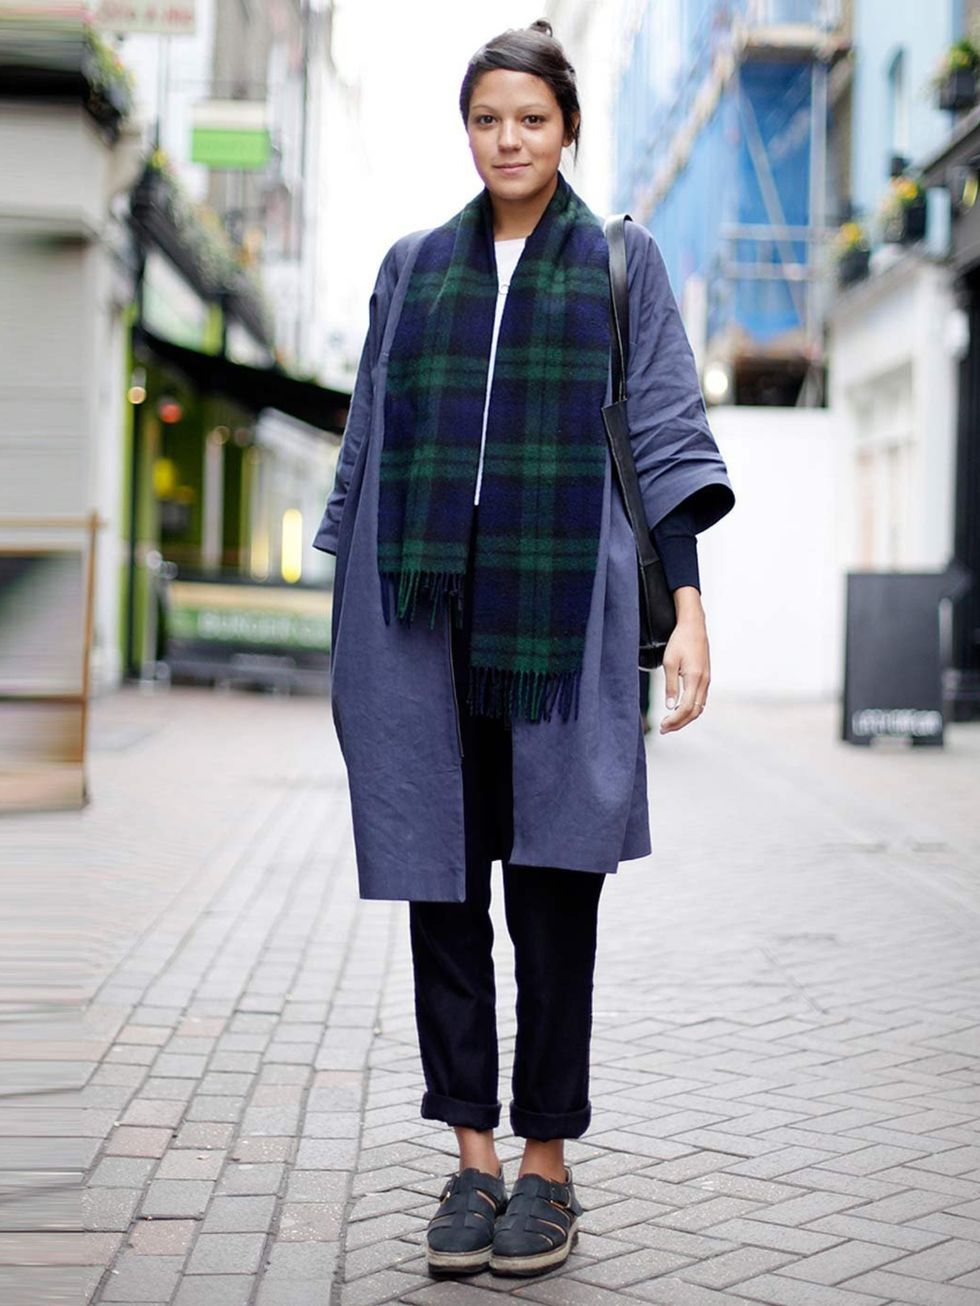 <p>Lara, 24, Copy Writer. Cos coat, trousers and bag, ASOS shoes vintage scarf.</p>